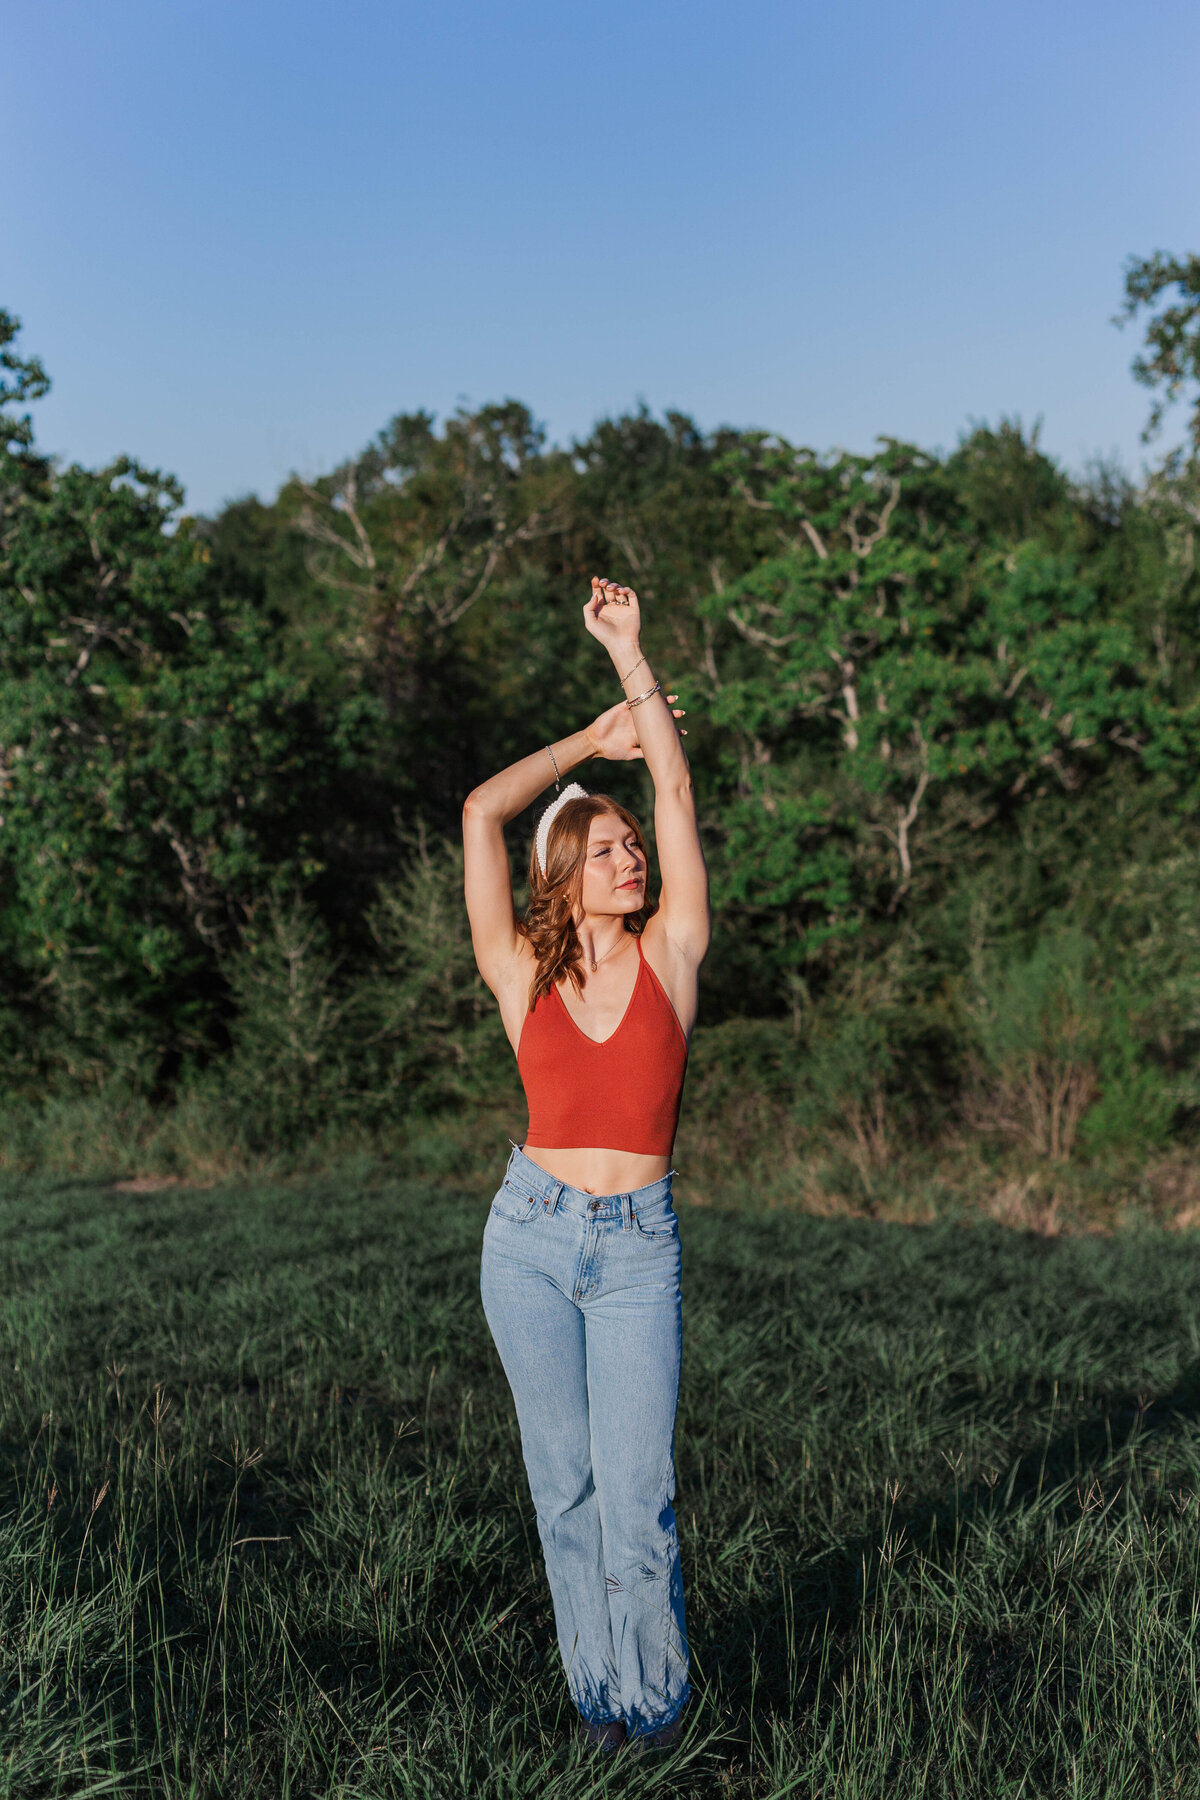 Red headed senior woman stands in a field with her arms gracefully above her head